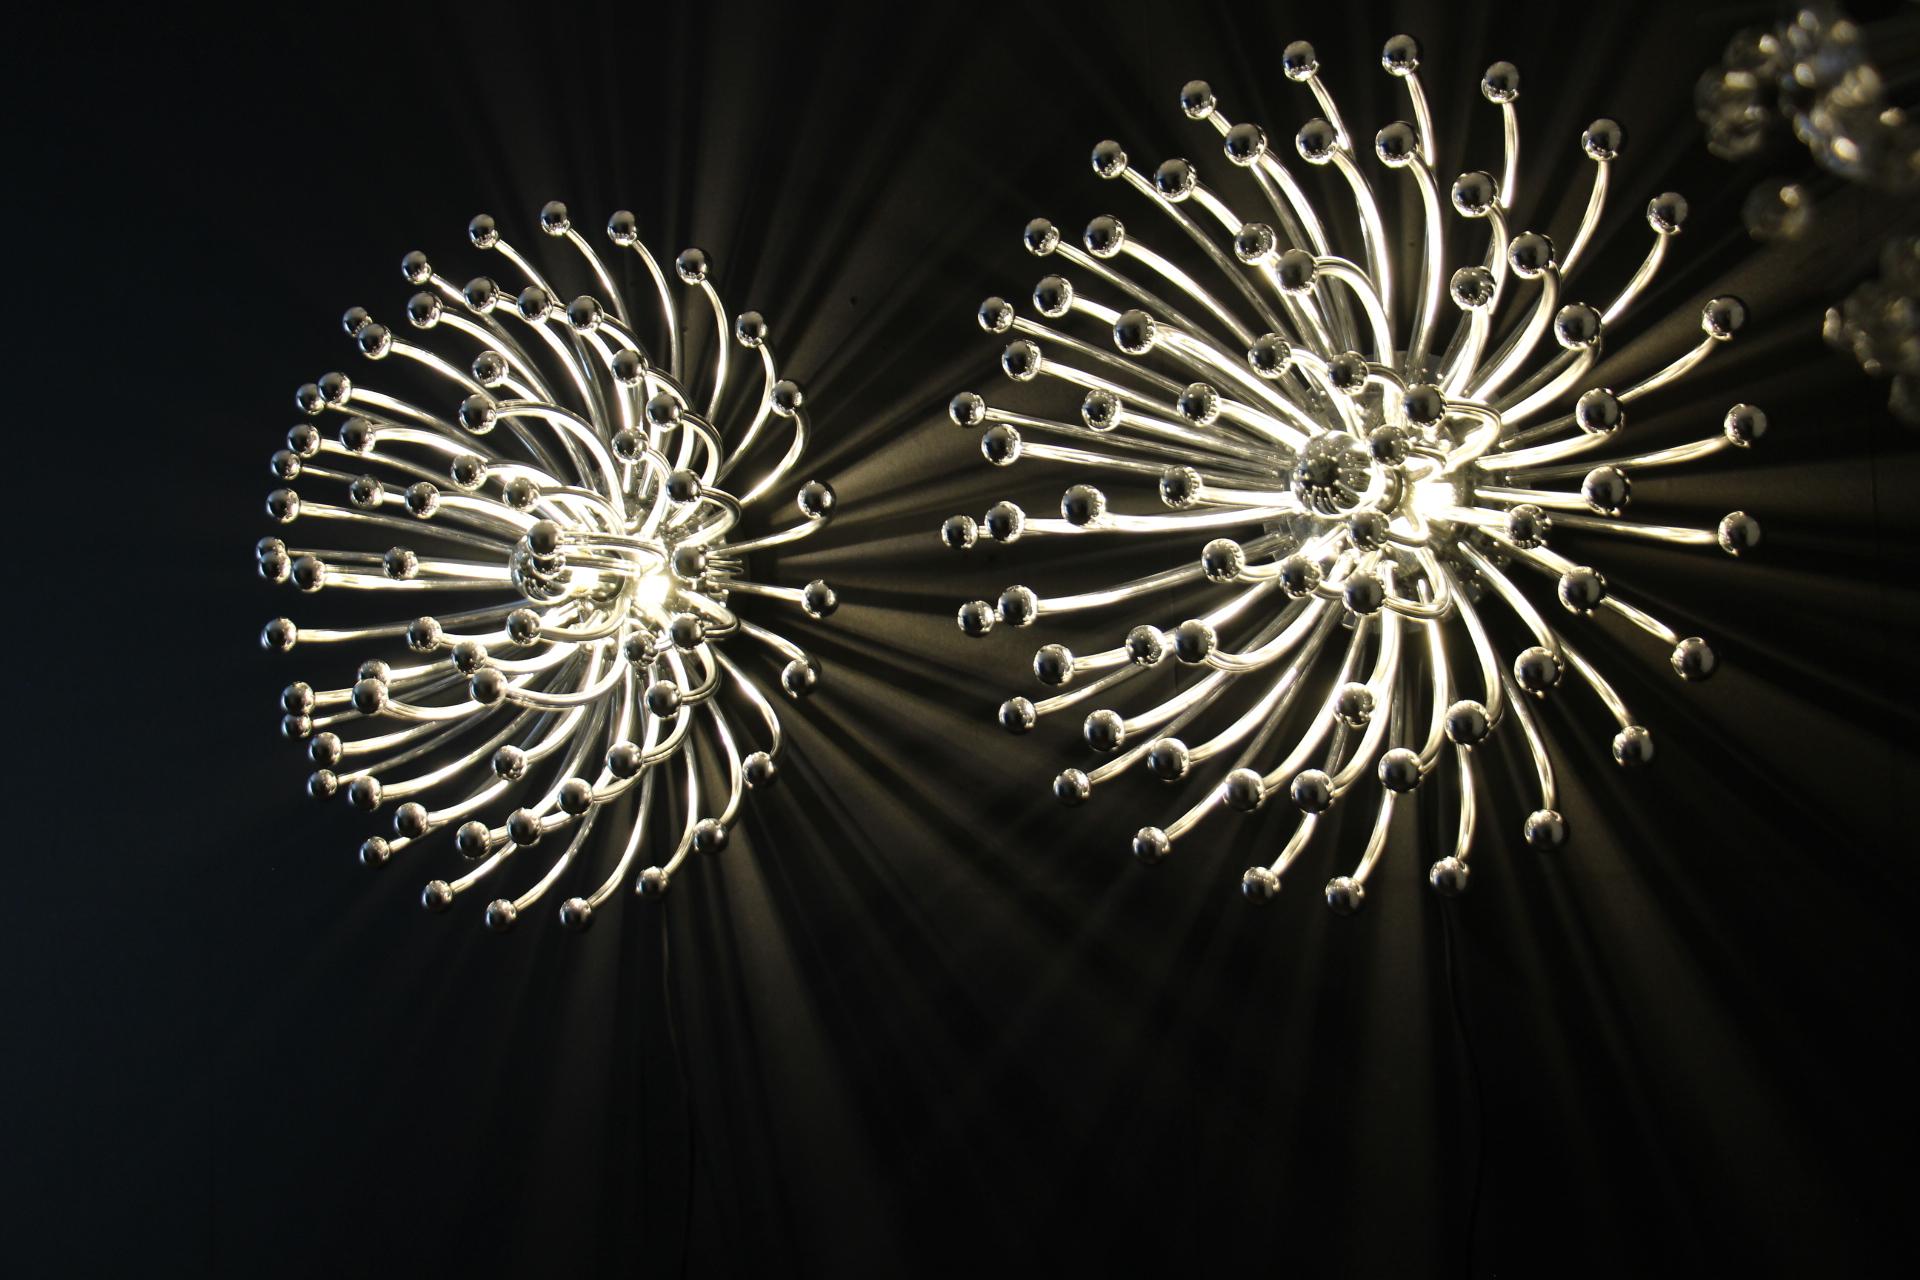 Contemporary 60 cm Silver Pistillo Chandeliers Table Lamps or Wall Lamps By Valenti Milano